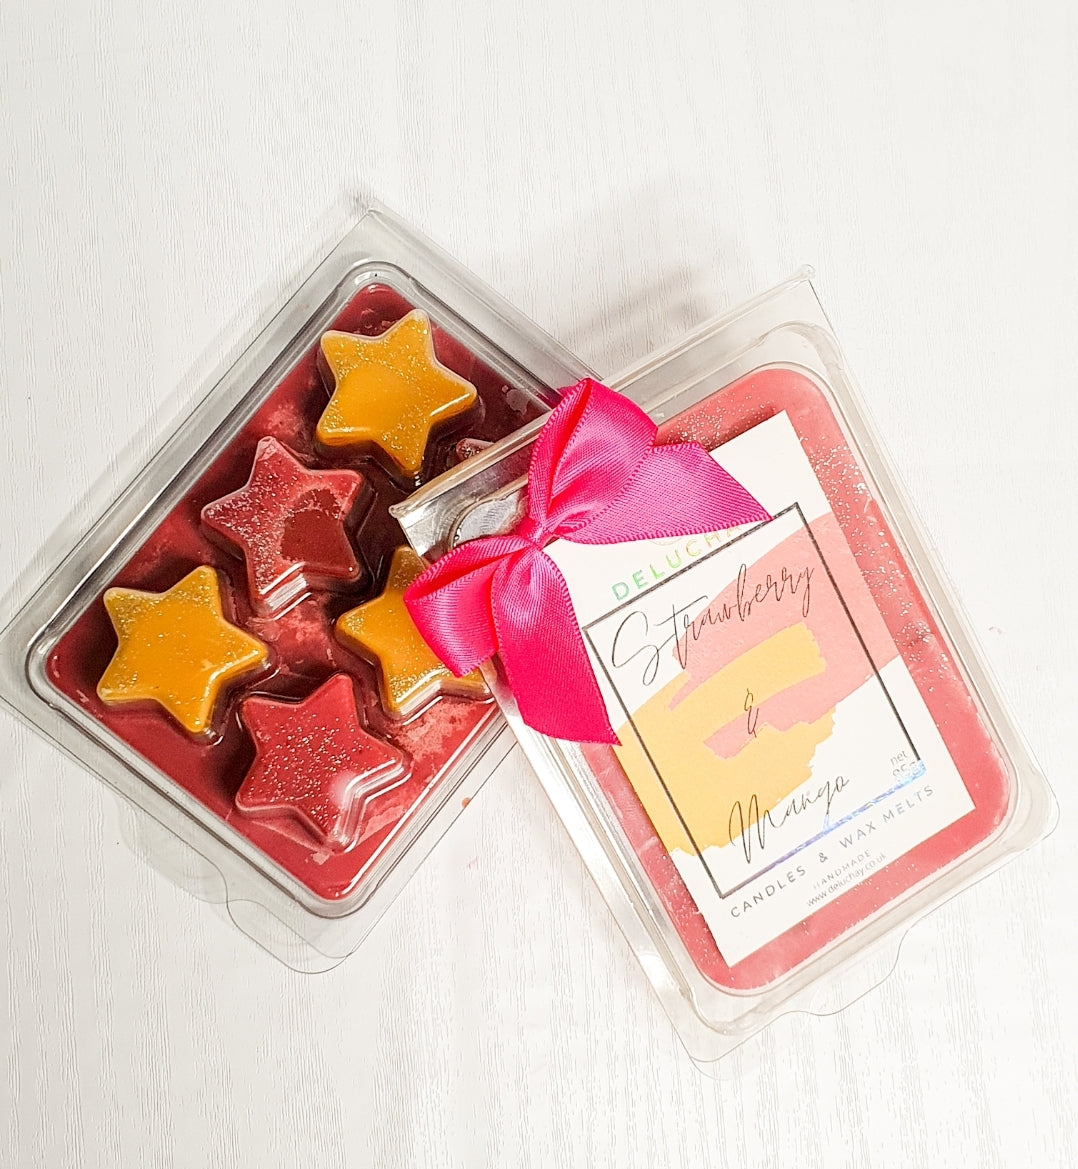 16 heart wax melts (Large) - DeLuchay